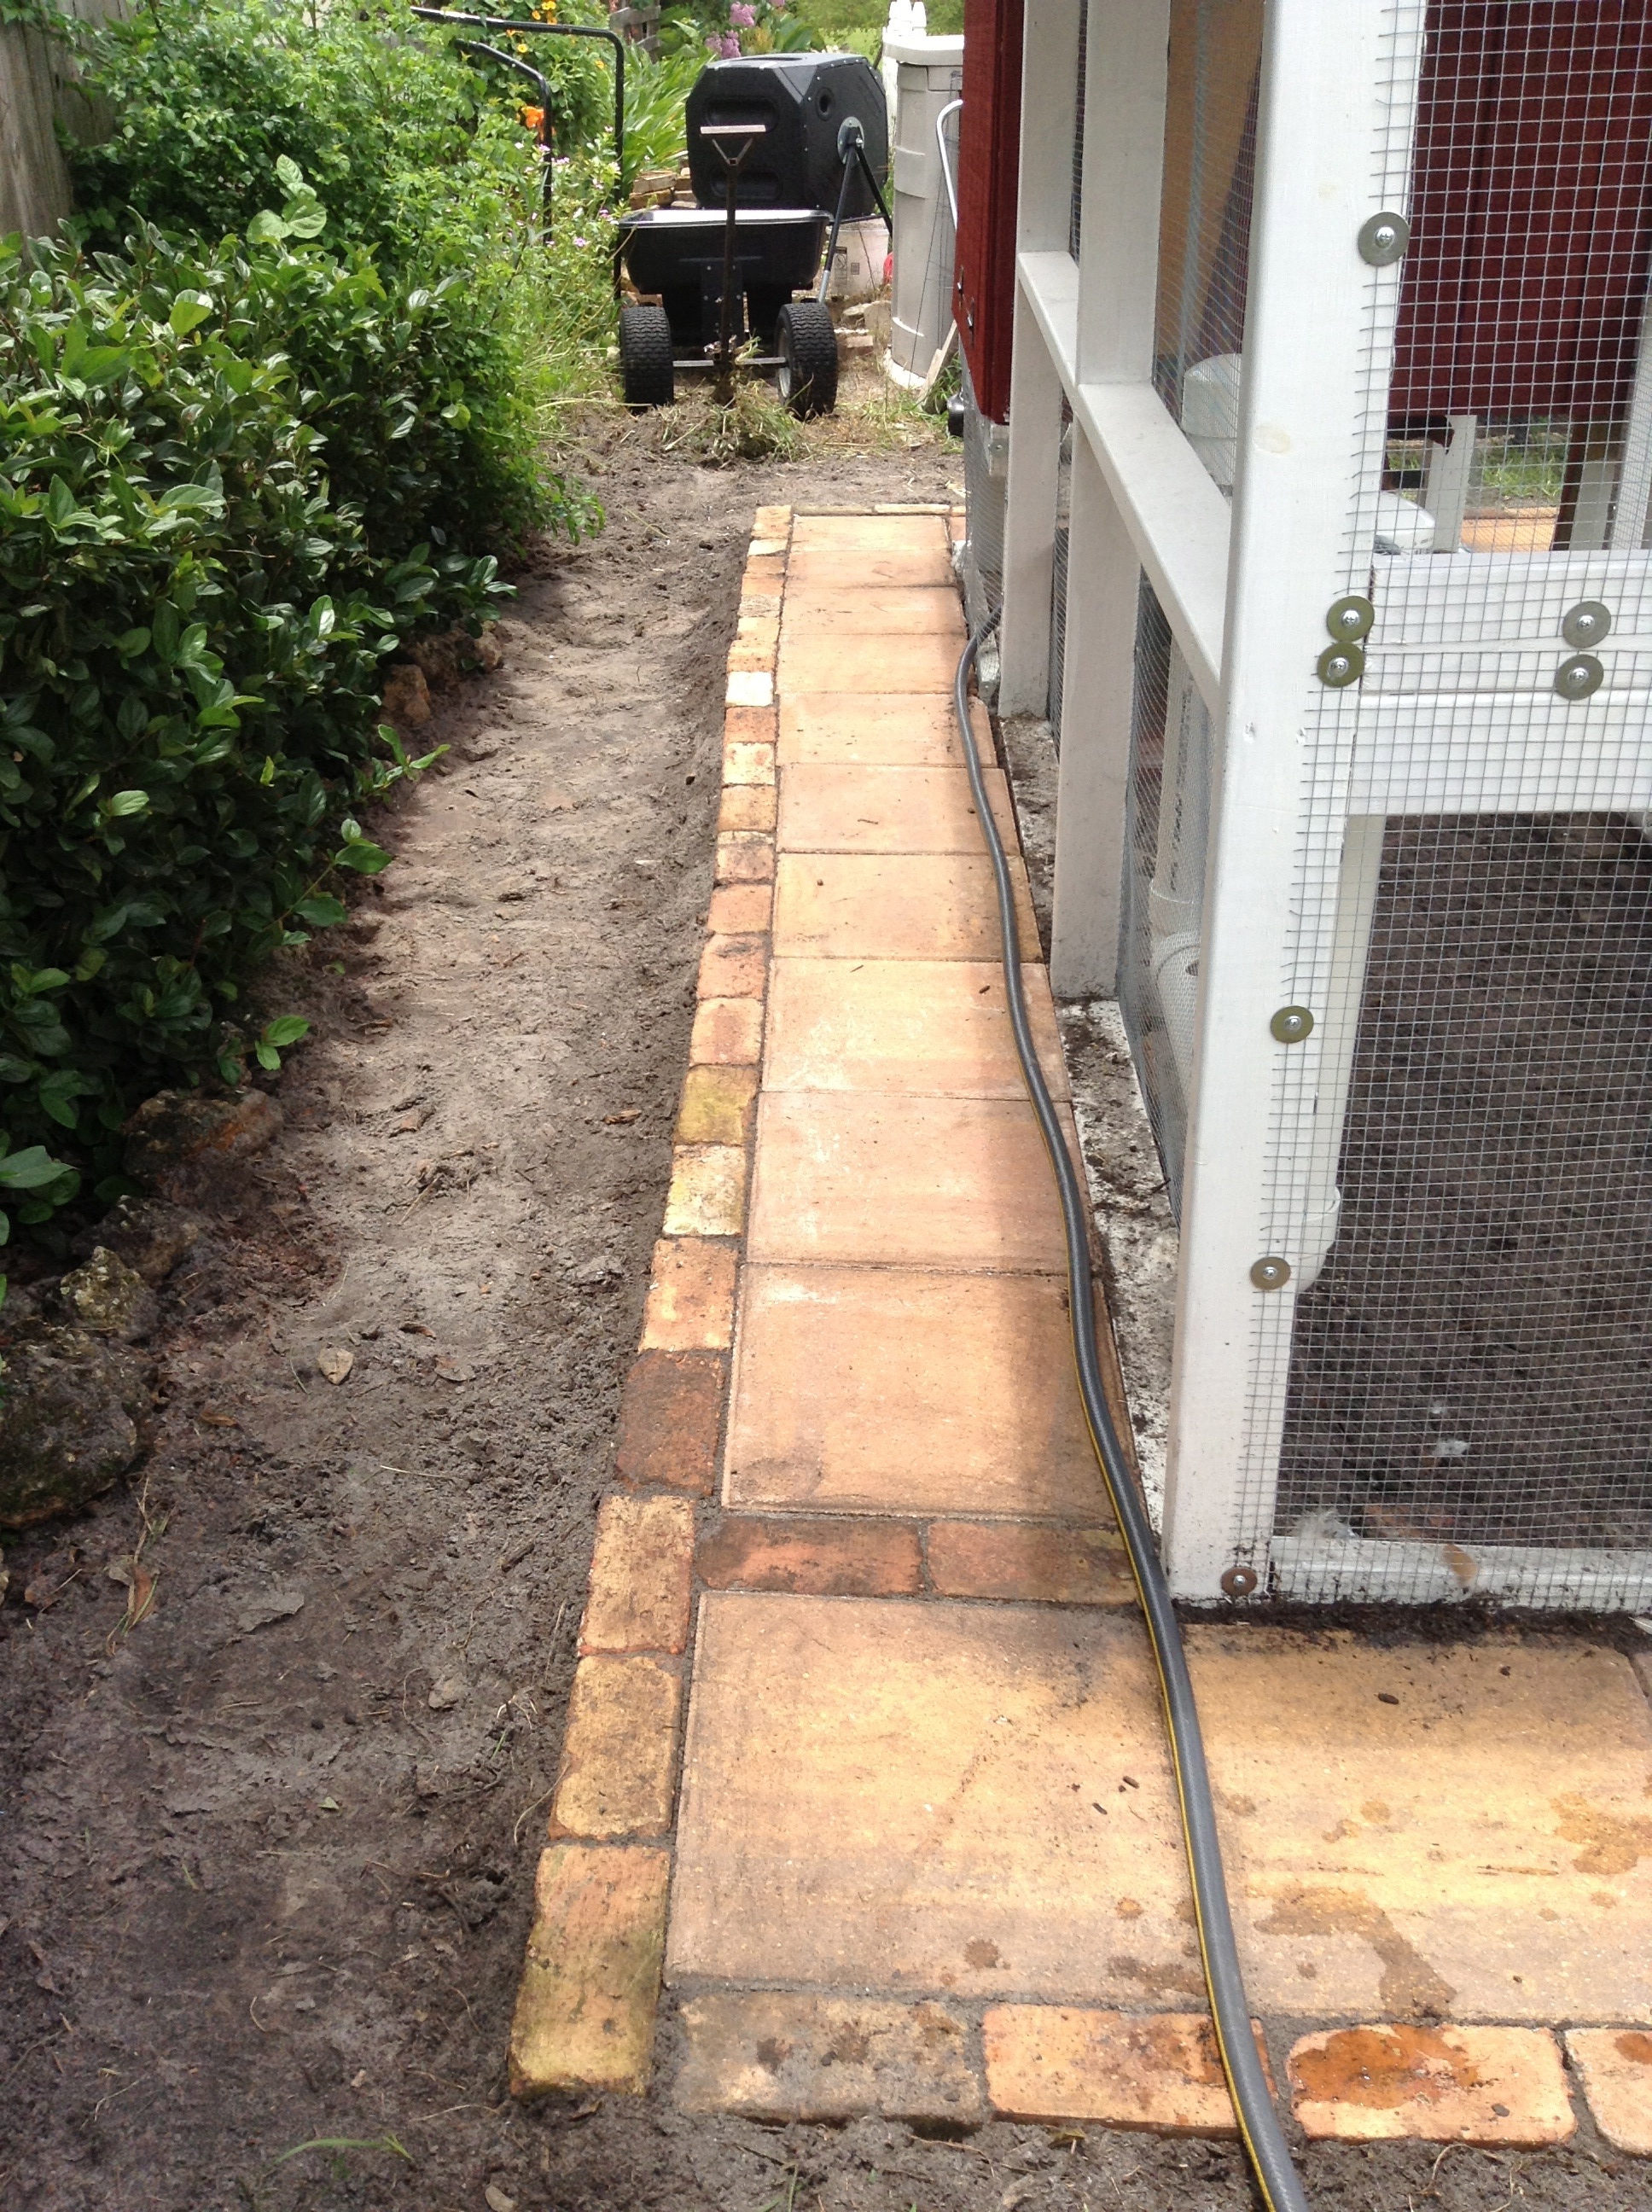 Back of coop after placing pavers.